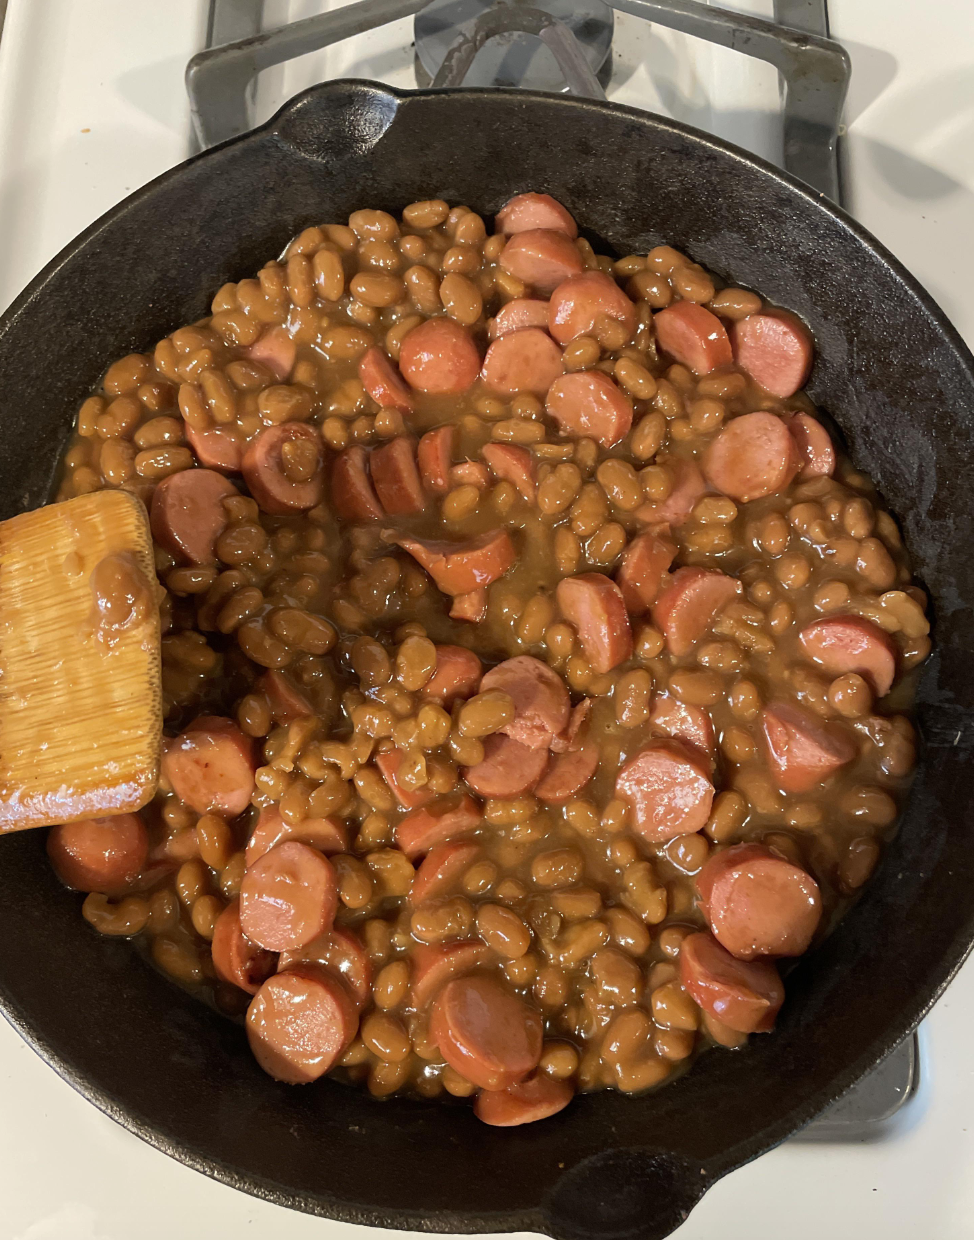 Hot dogs and beans in a pan